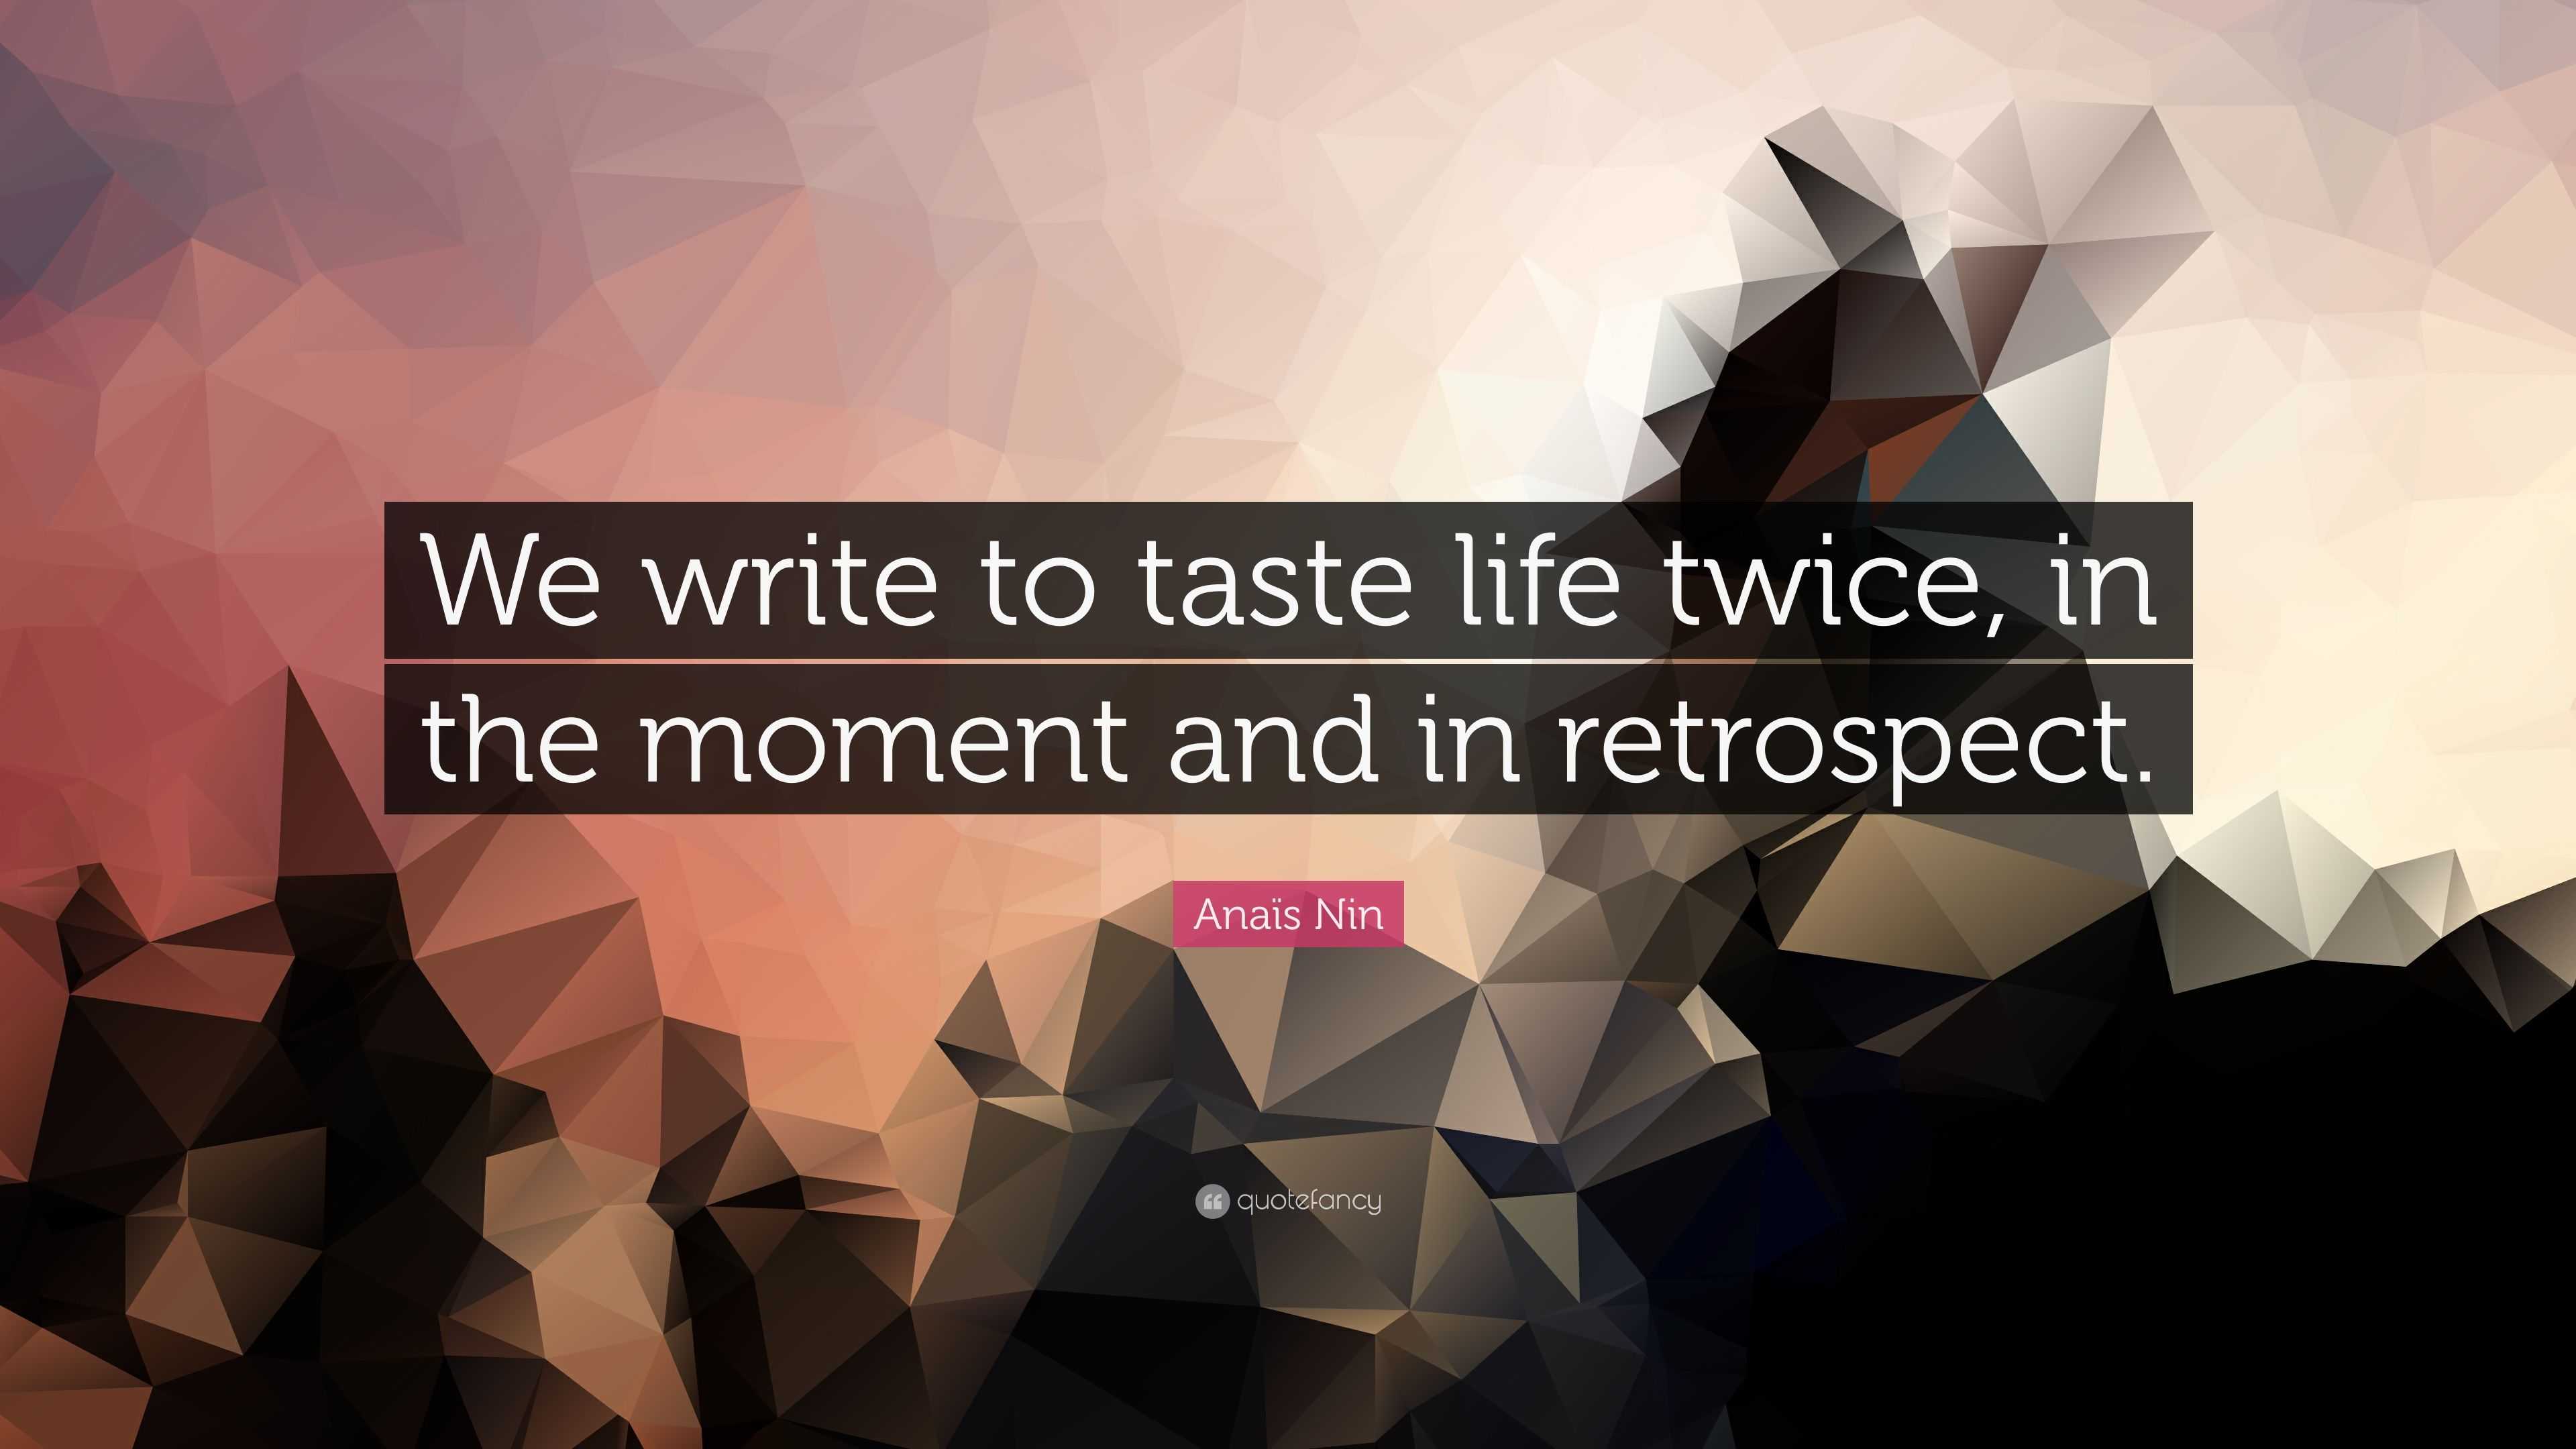 Gifts for Writers We Write to Taste Life Twice Anais Nin Quote Sticker  Gifts for Writers and Authors 